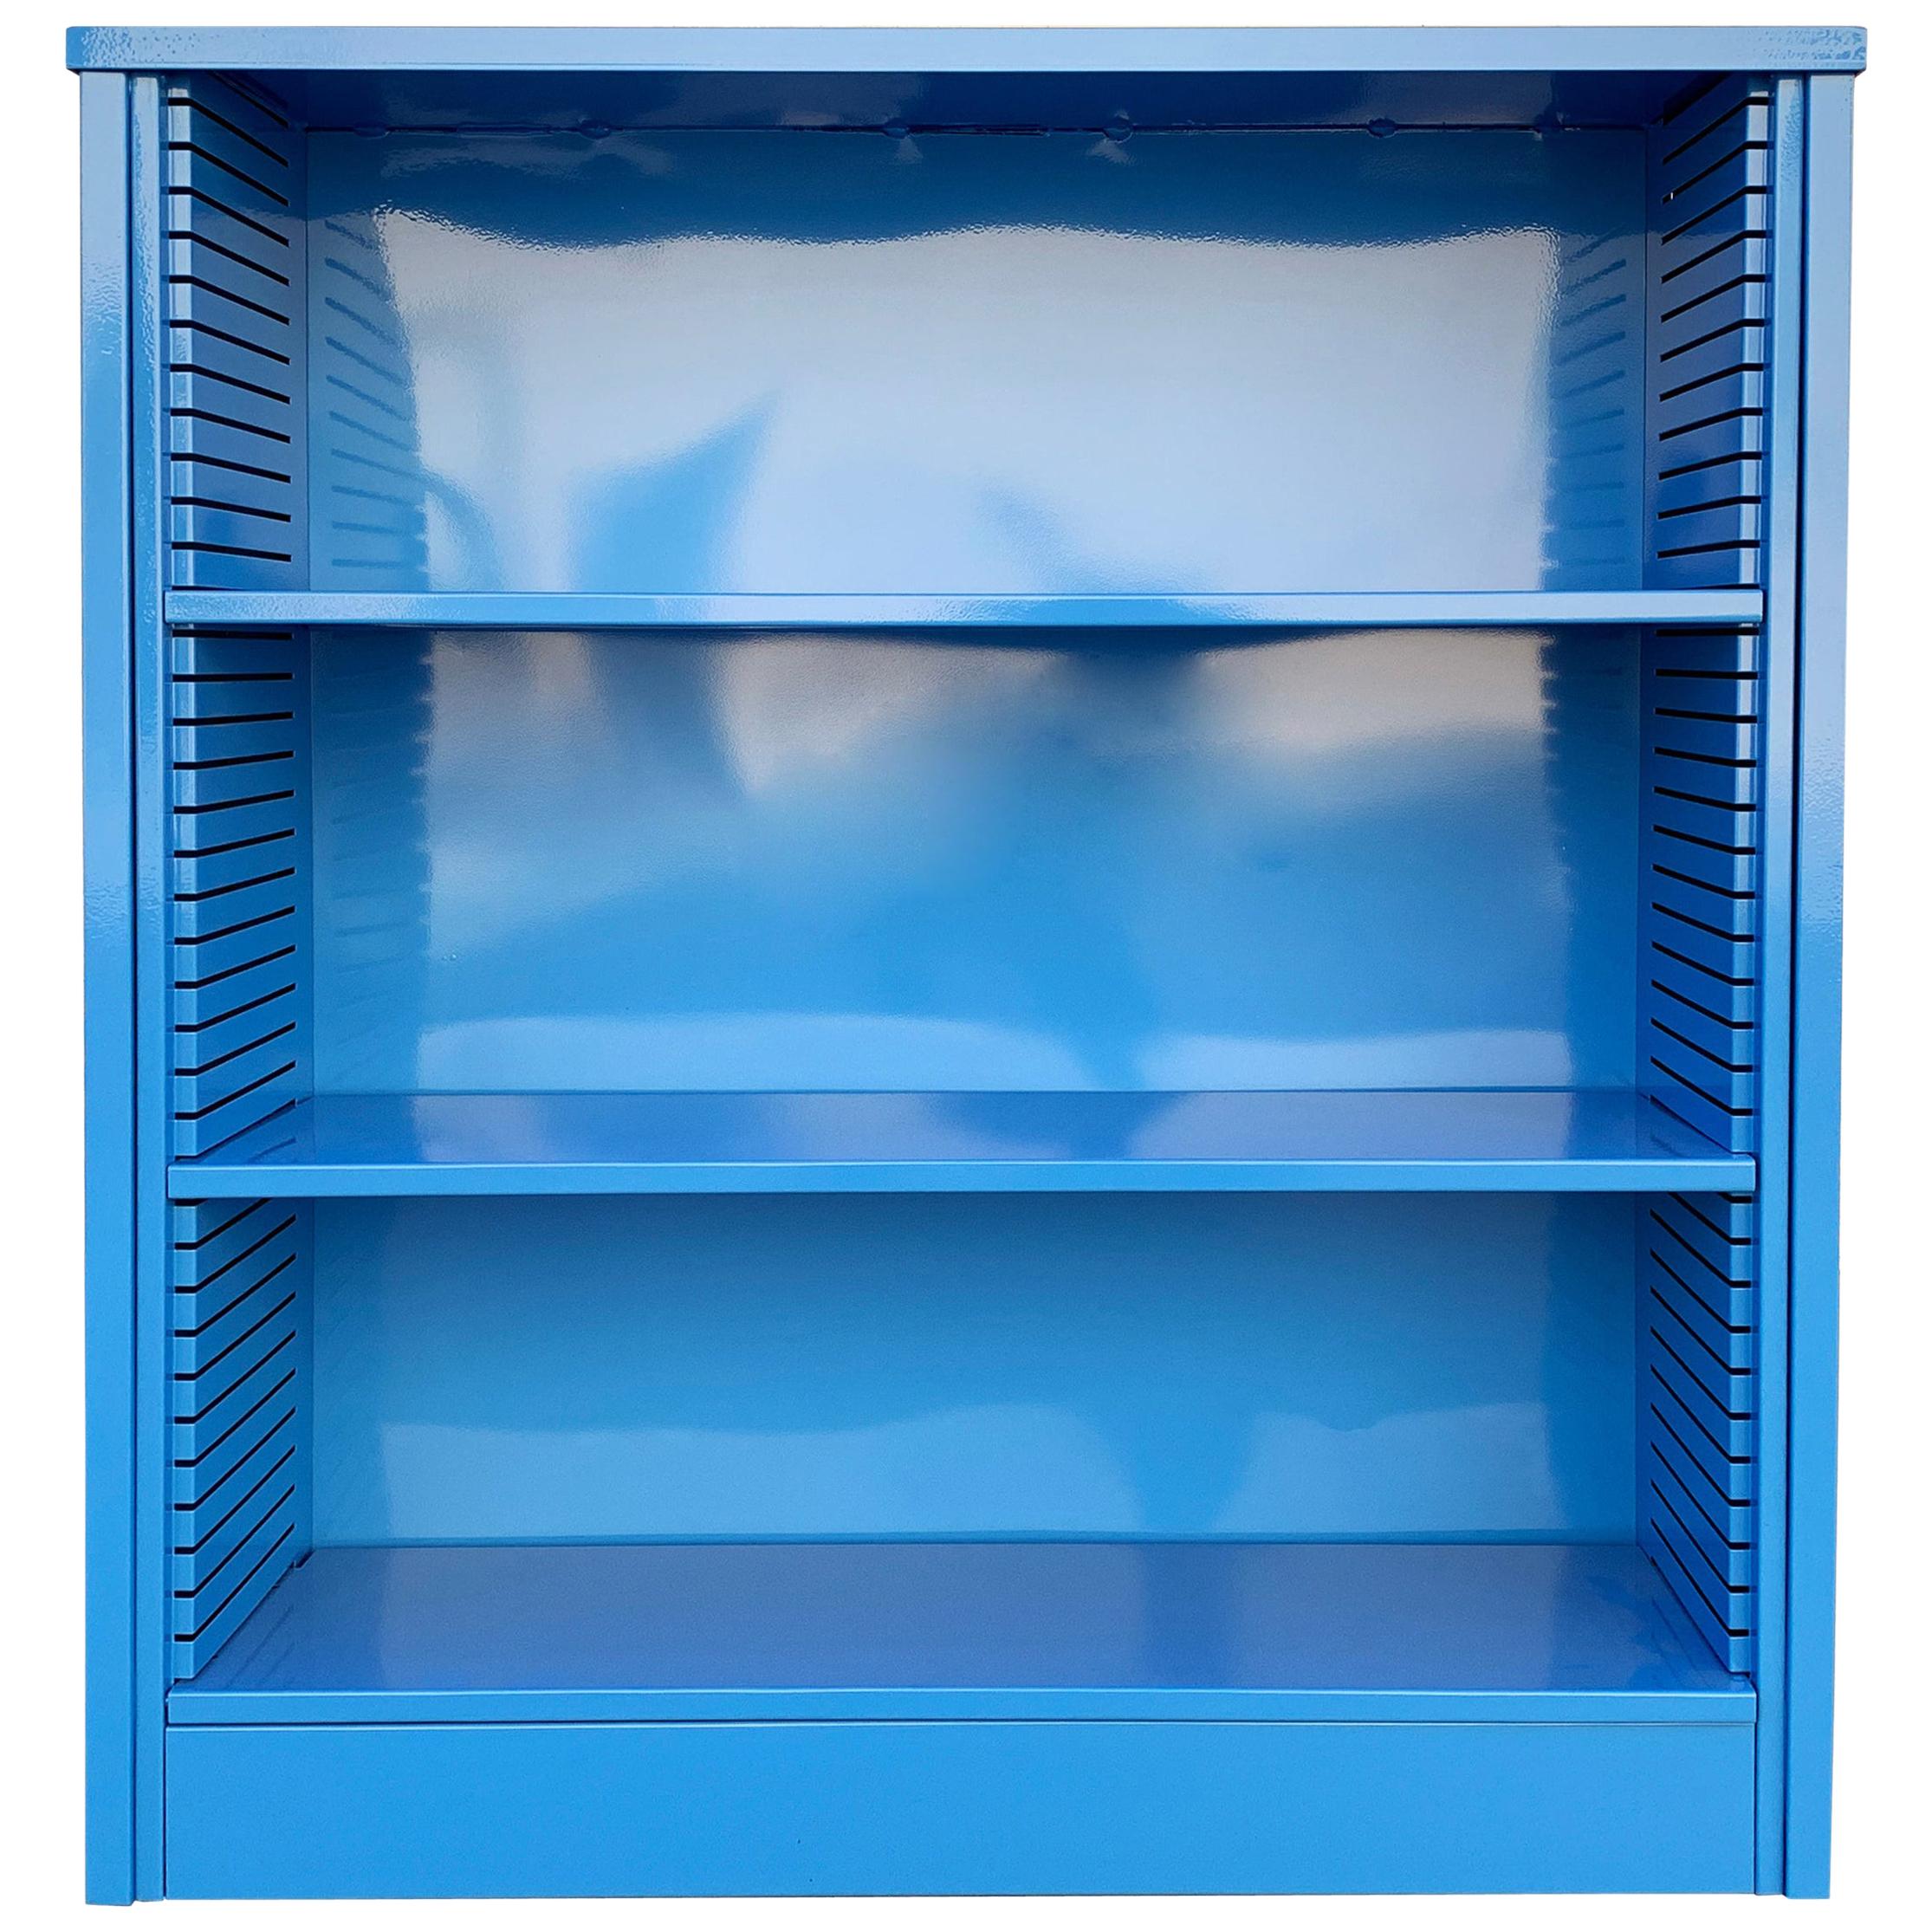 1960s Steel Tanker Style Bookcase in Blue ‘BL05’, Custom Refinished For Sale